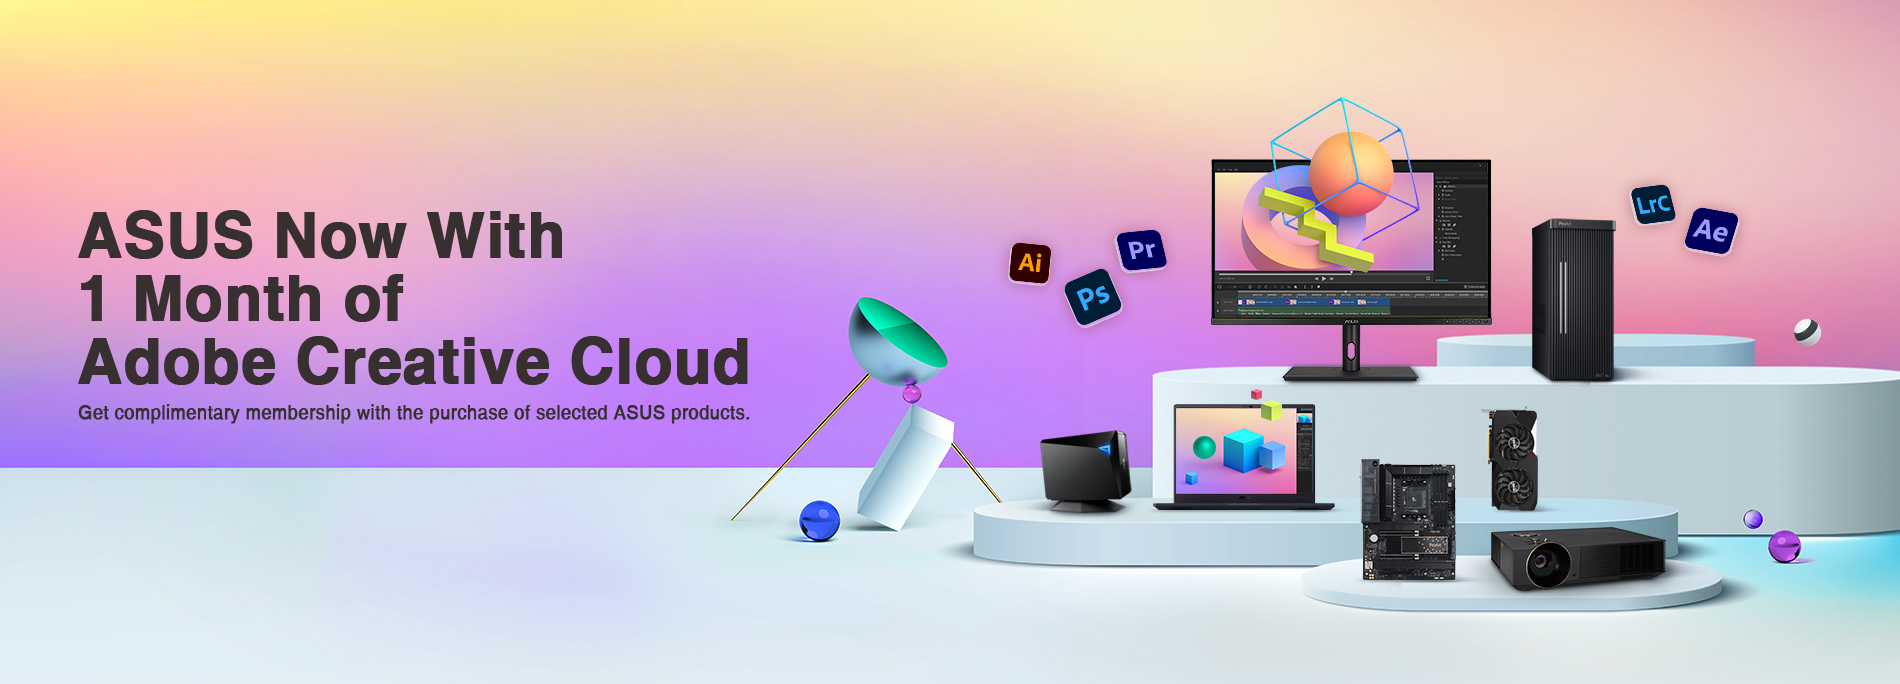 Adobe Creative Cloud One-month subscription is just $45